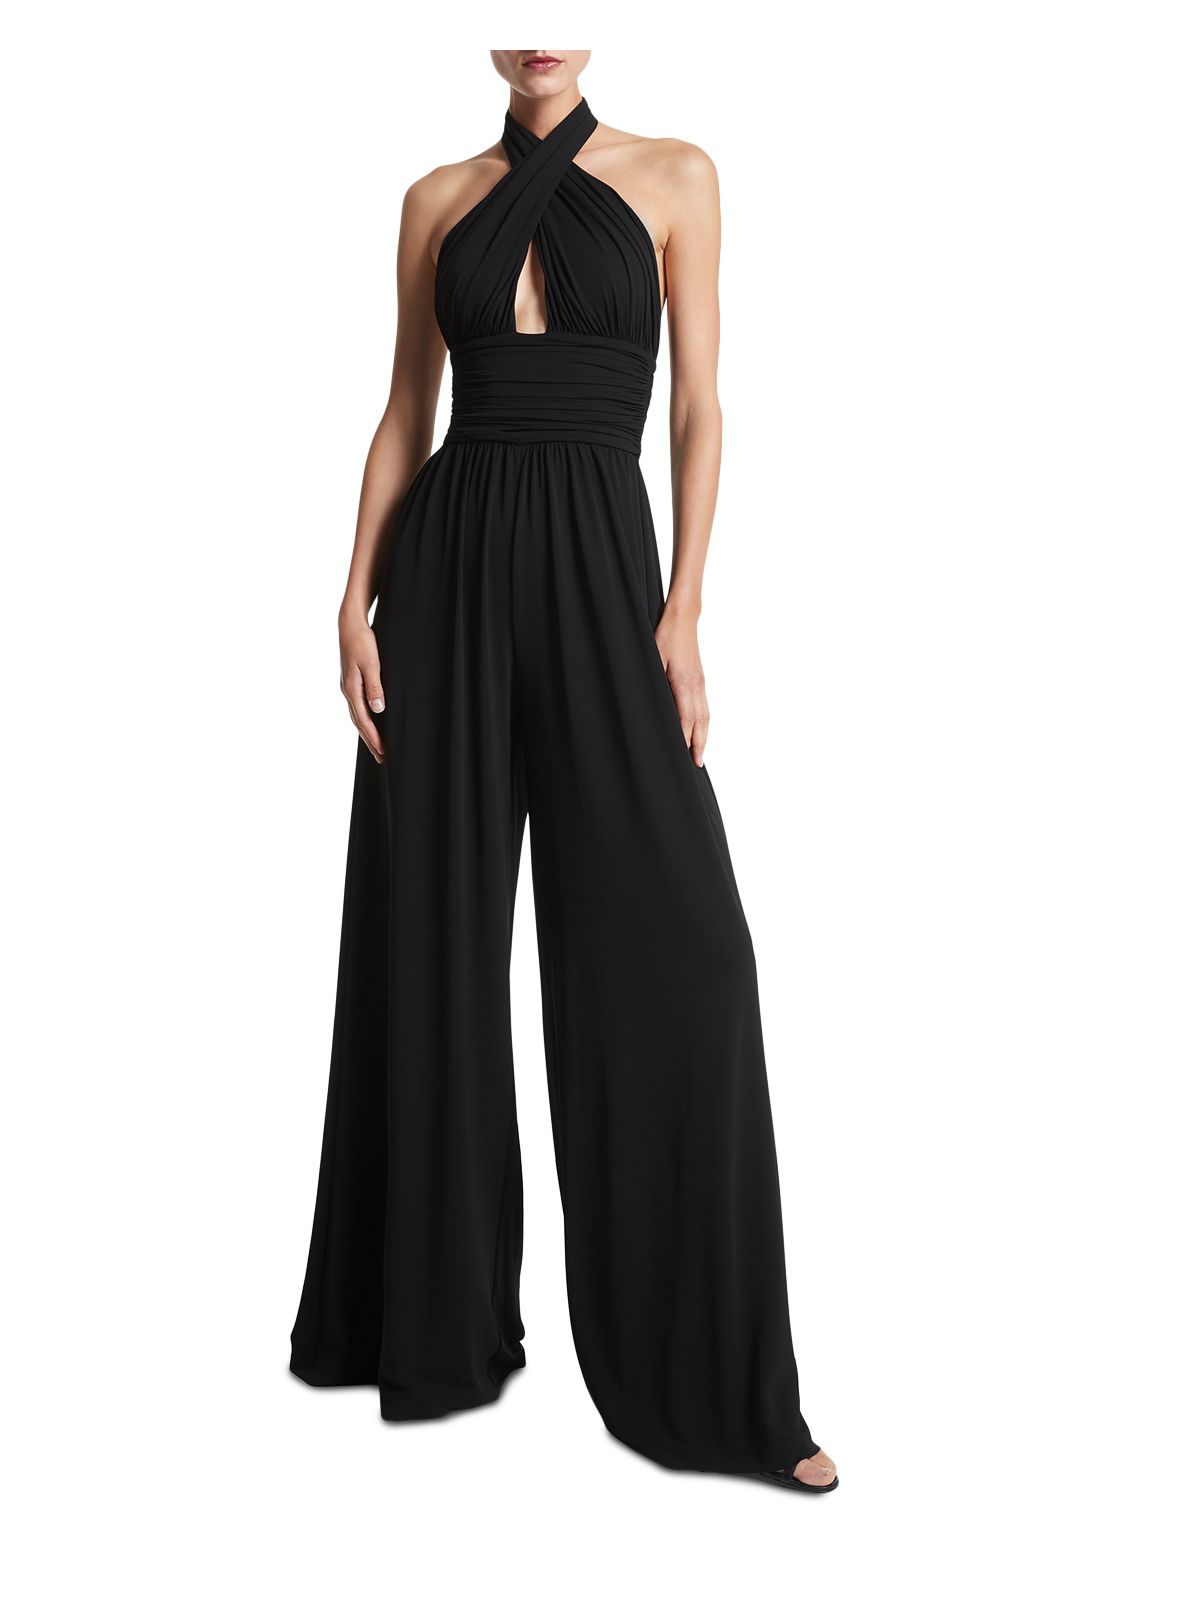 MICHAEL KORS COLLECTION Womens Black Stretch Ruched Zippered Crossover Keyhole Gathered Sleeveless Halter Party Wide Leg Jumpsuit 6